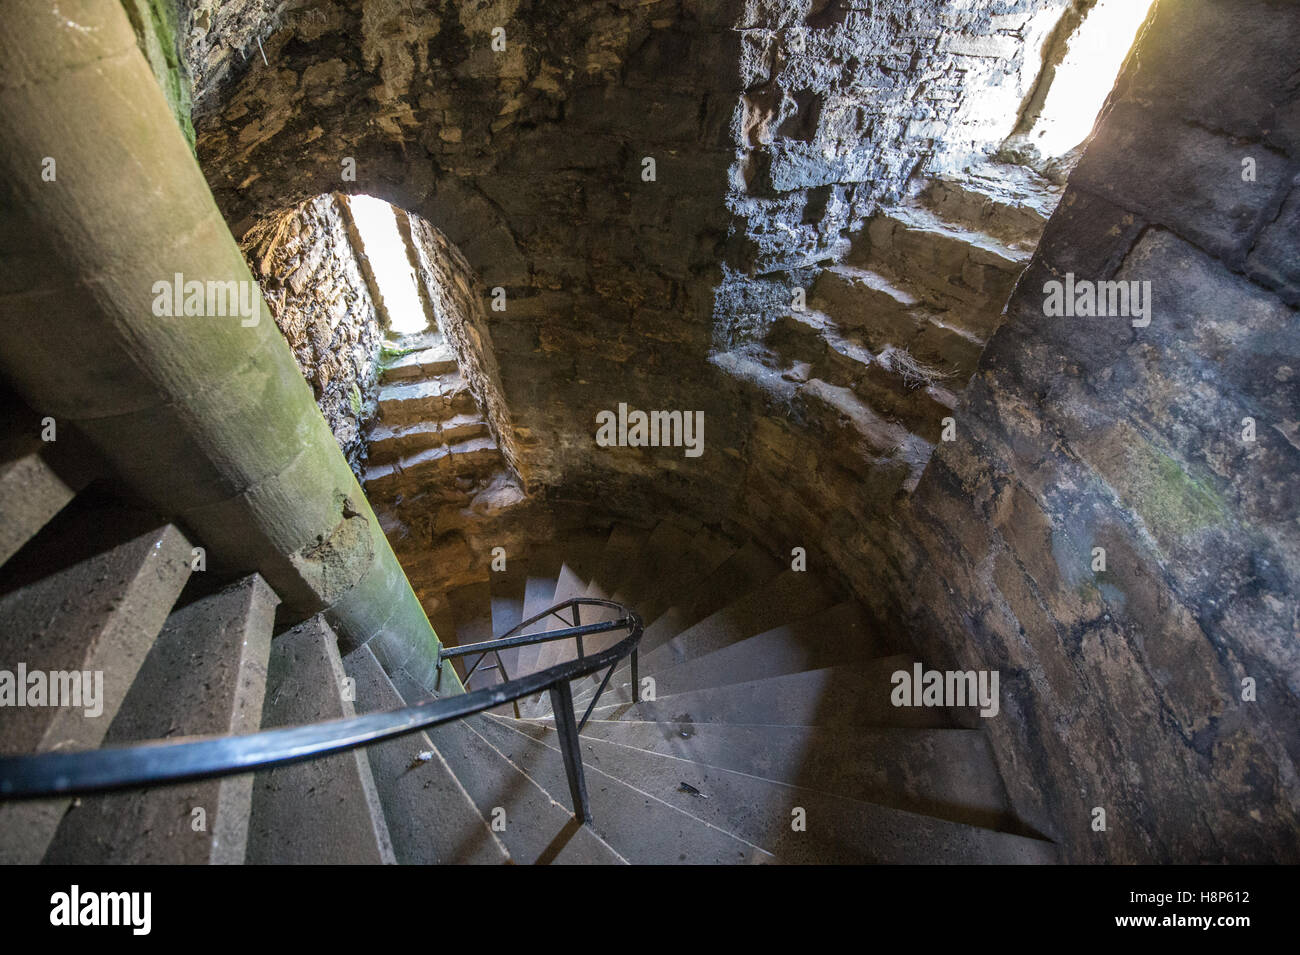 UK, England, Yorkshire, Wensleydale, Middleham - A winding staircase inside Middleham Castle, located in the small town of Middl Stock Photo